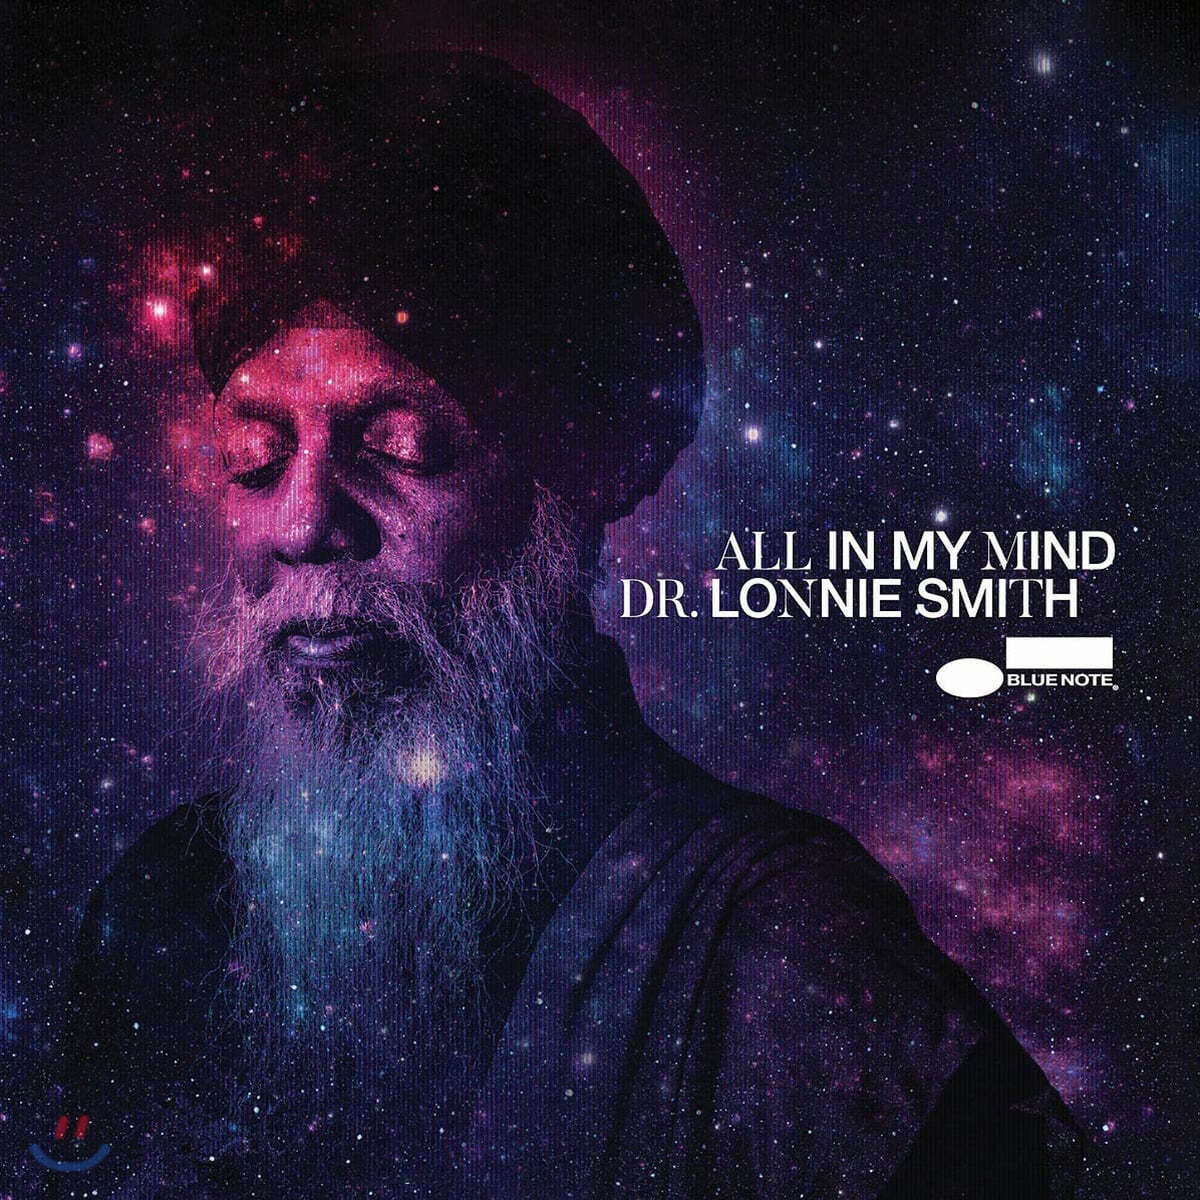 Dr. Lonnie Smith (닥터 로니 스미스) - All In My Mind [LP]